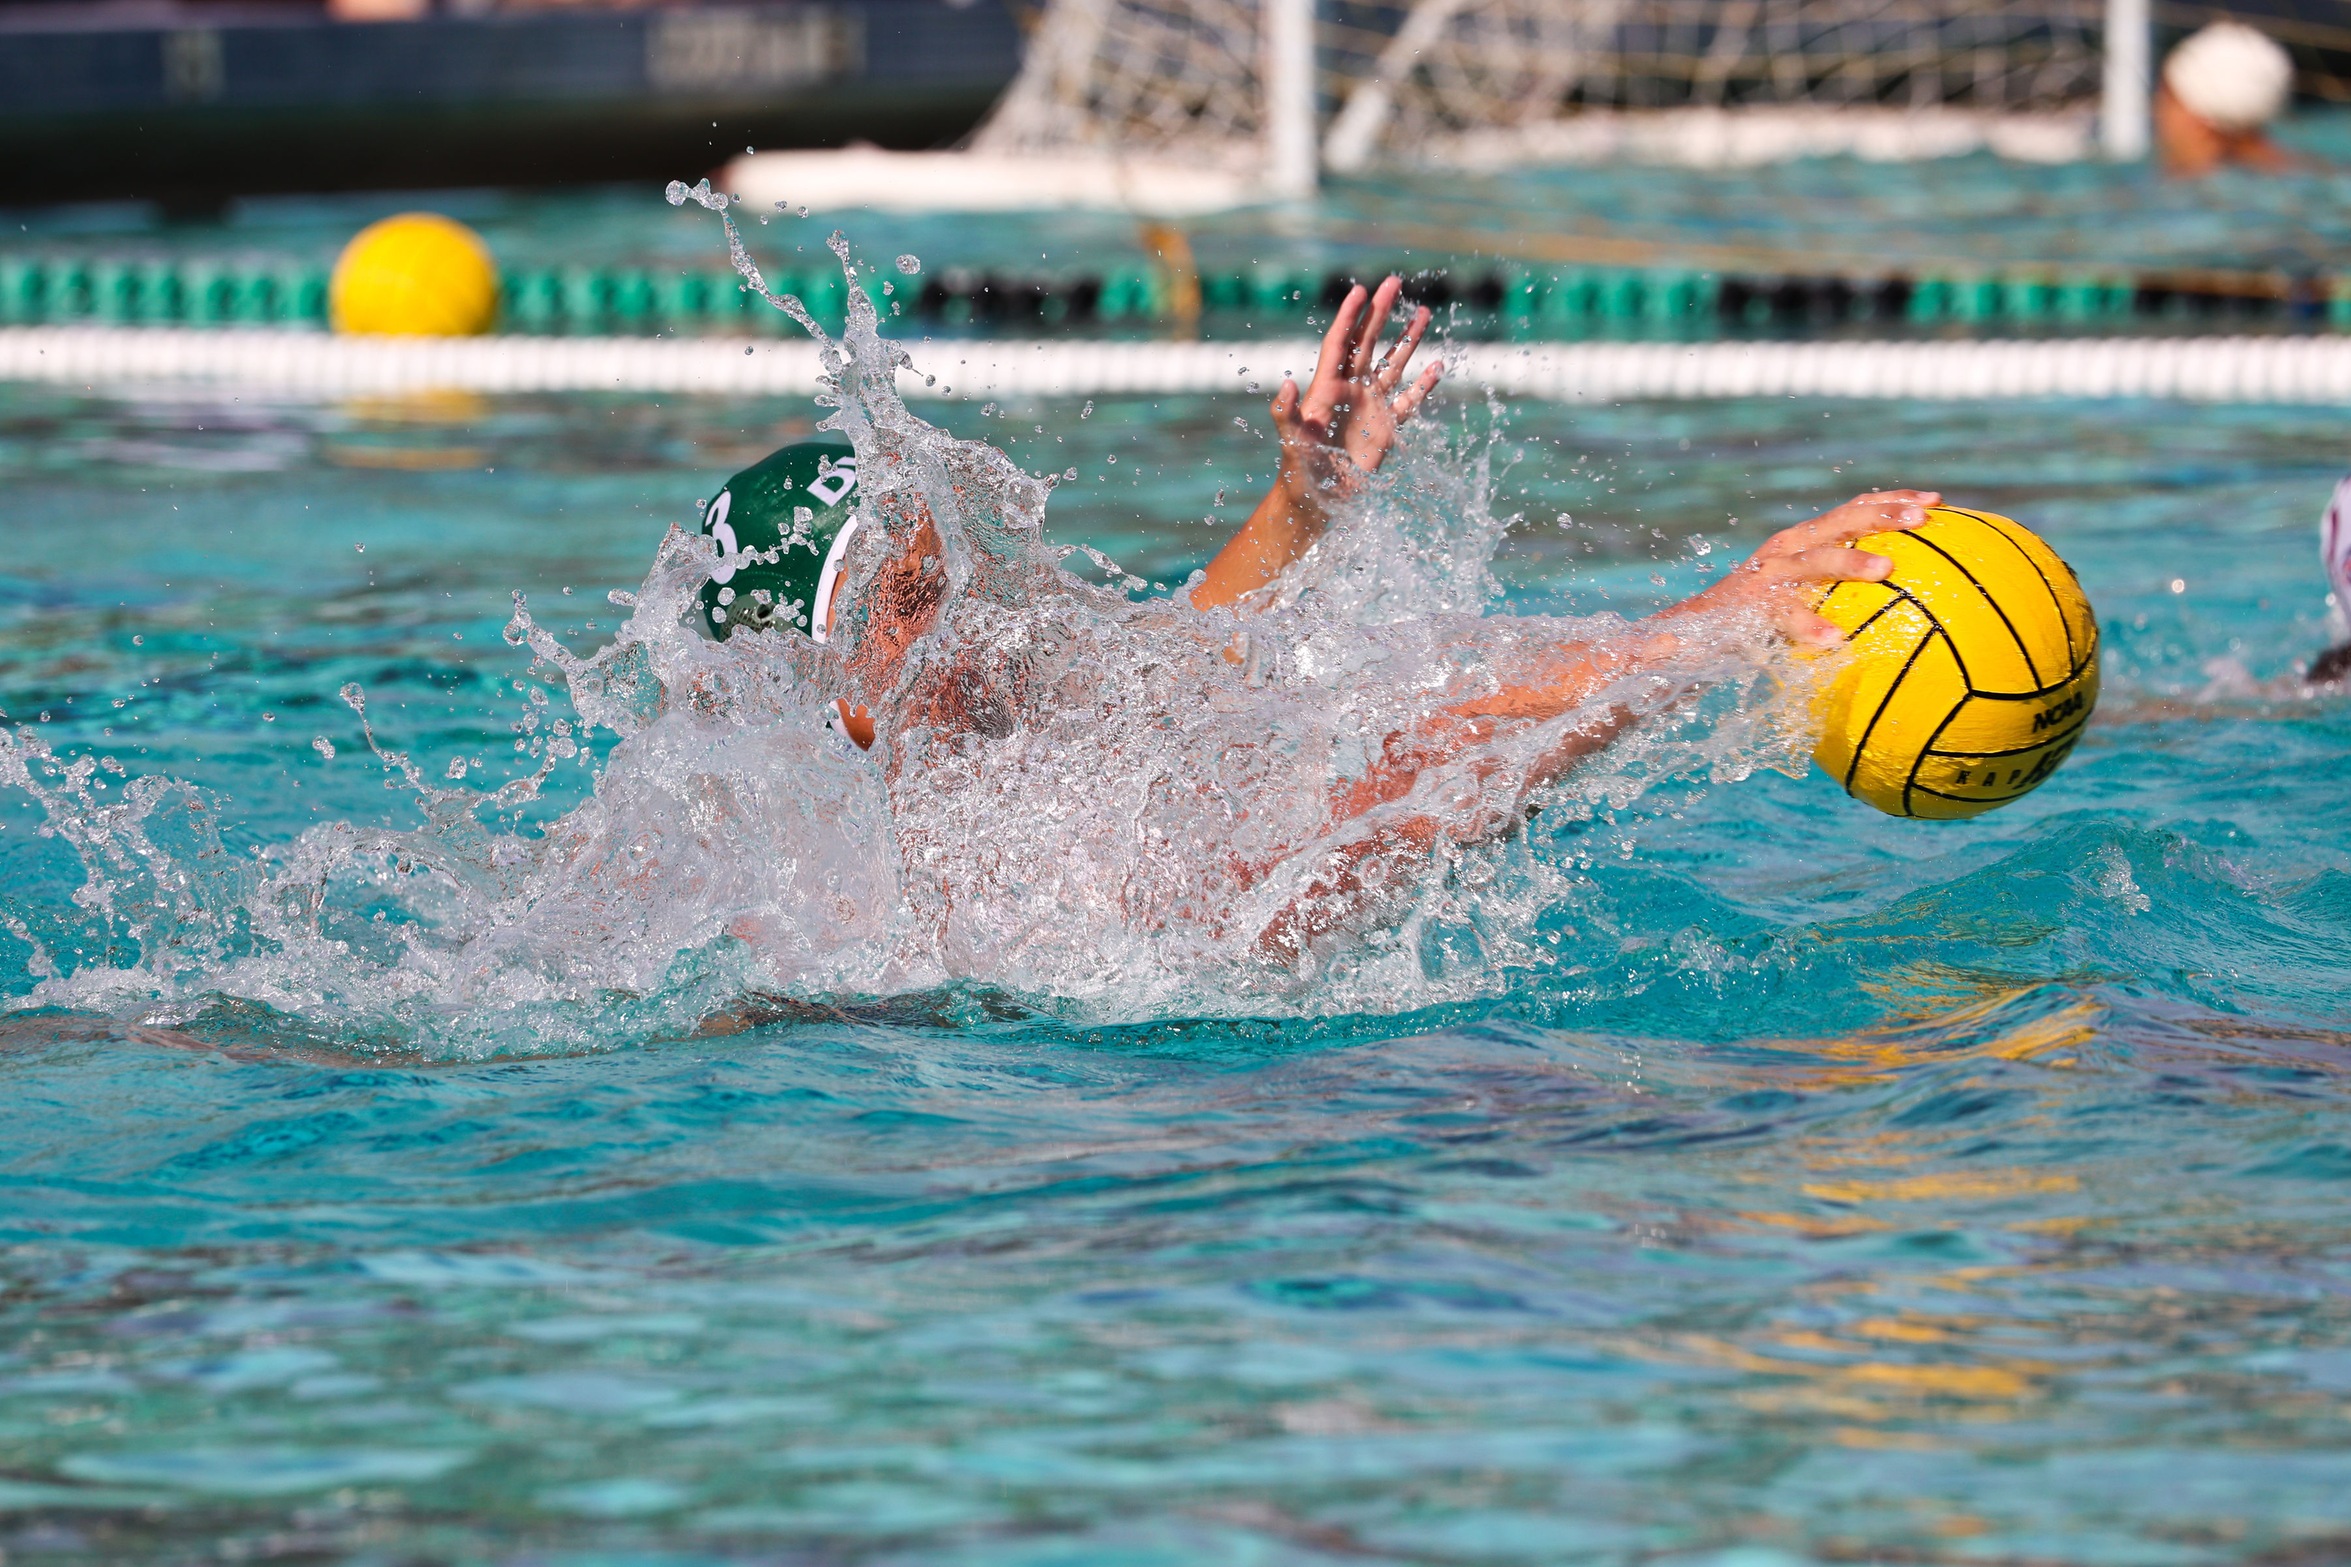 Men's Water Polo goes 2-2 in last 4 games with wins over Modesto and Las Positas